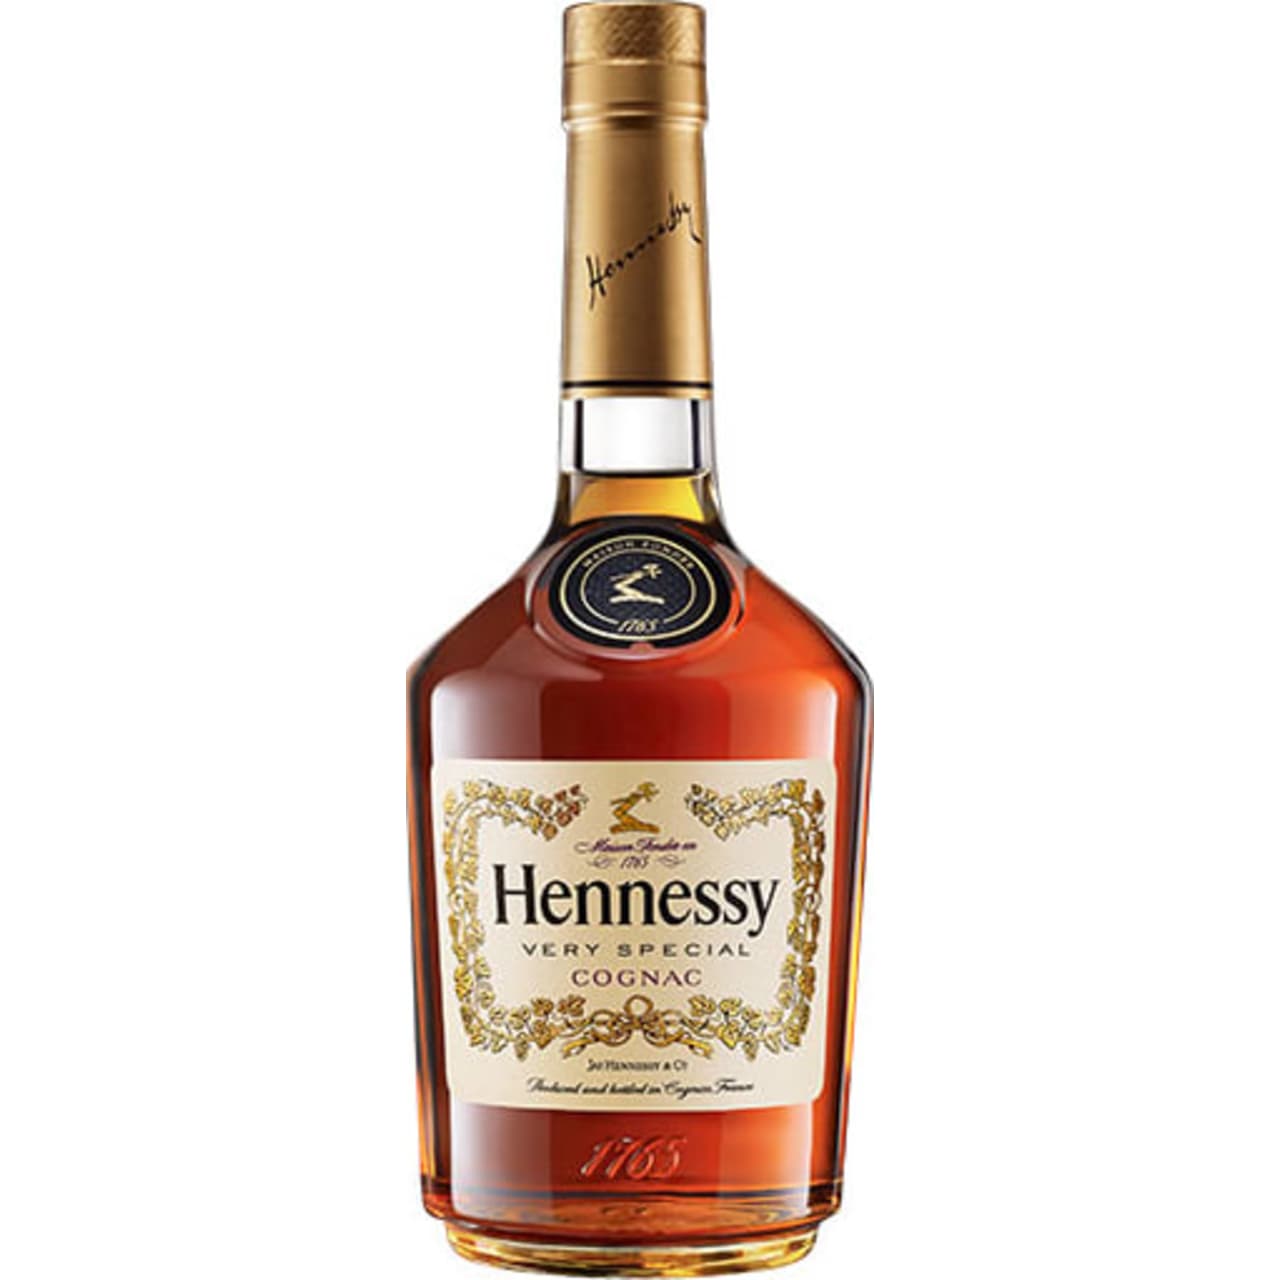 Hennessy Very Special (V.S) is one of the most popular cognacs in the world. Matured in new oak barrels, Hennessy V.S is bold and fragrant. Its beguiling character is uniquely Hennessy, a timeless choice with an intensity all its own. Hennessy V.S offers toasted and fruit notes, with a rich, clearly defined palate and a welcoming exuberance.